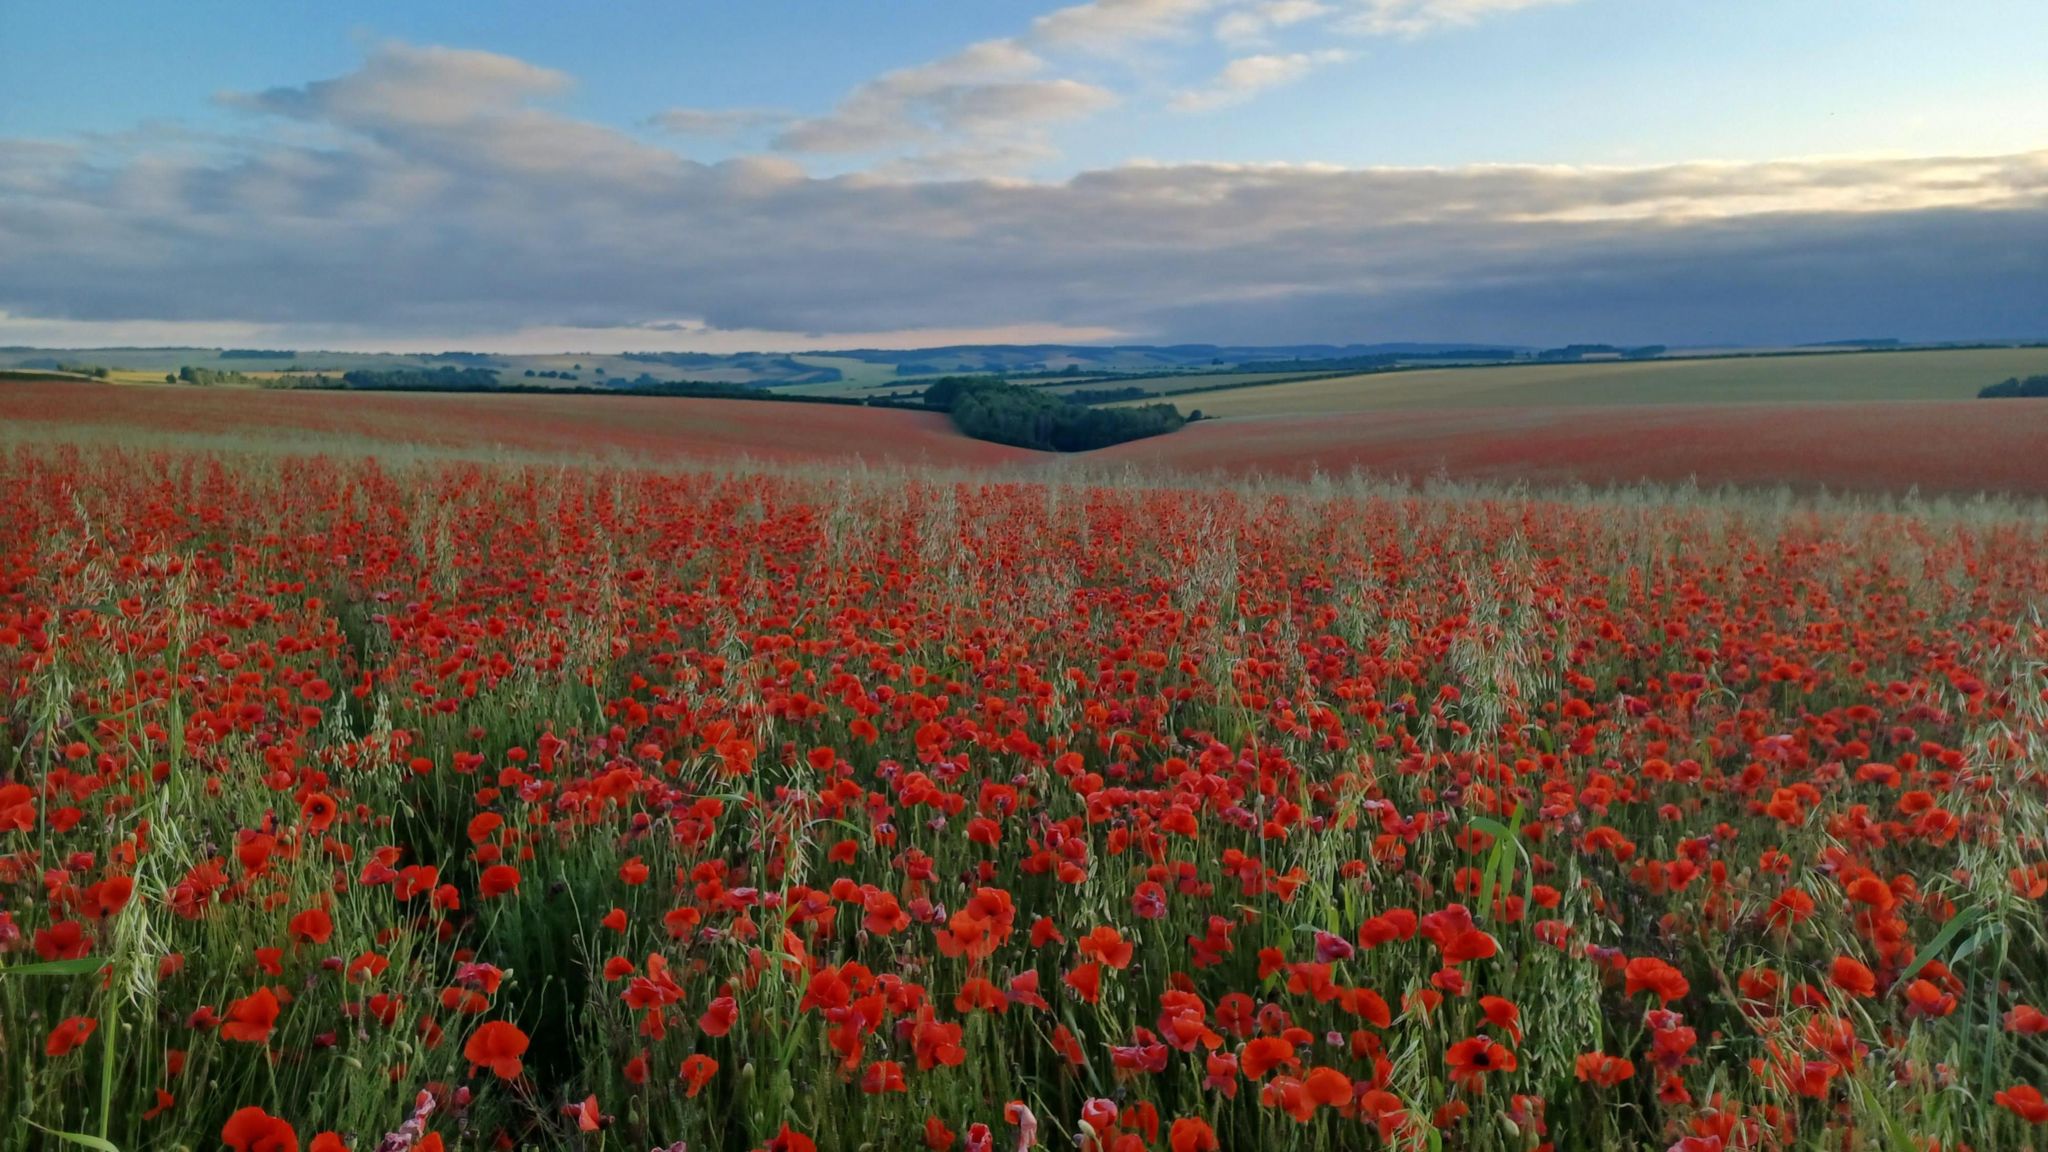 TUESDAY - Field filled with poppies near Wimborne